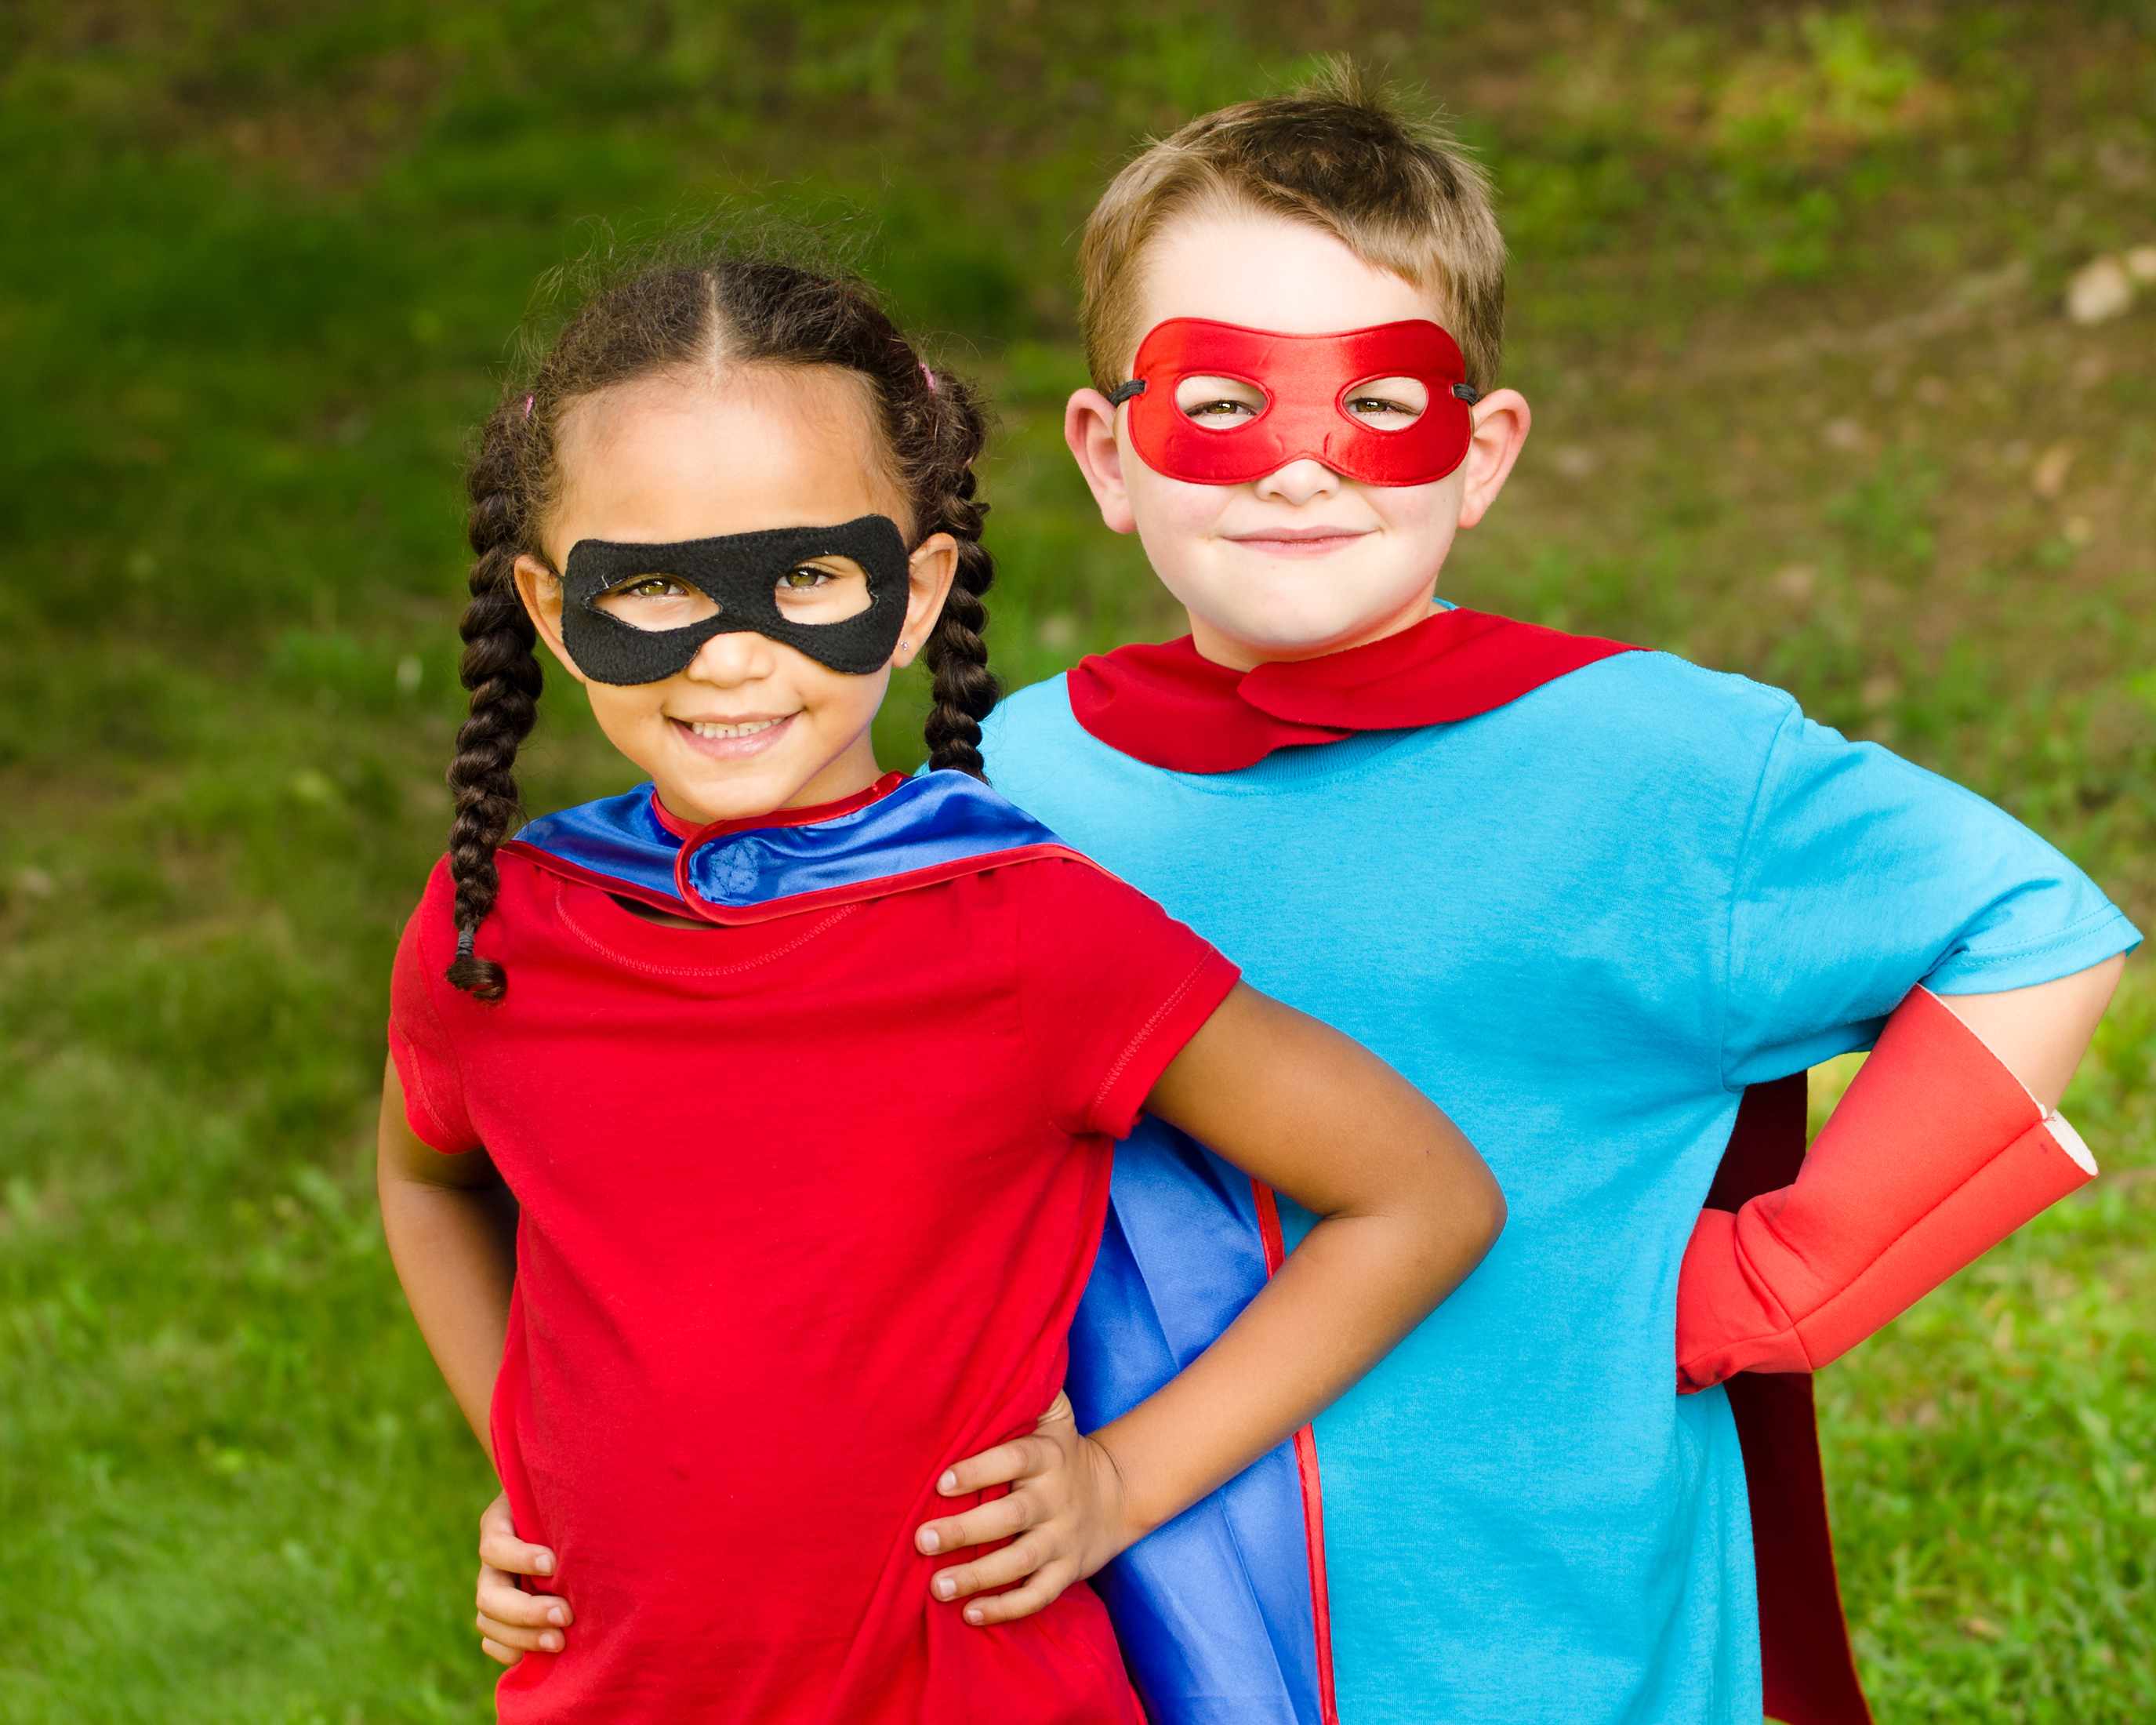 a little girl and a little boy dressed up in costumes as superheroes with masks